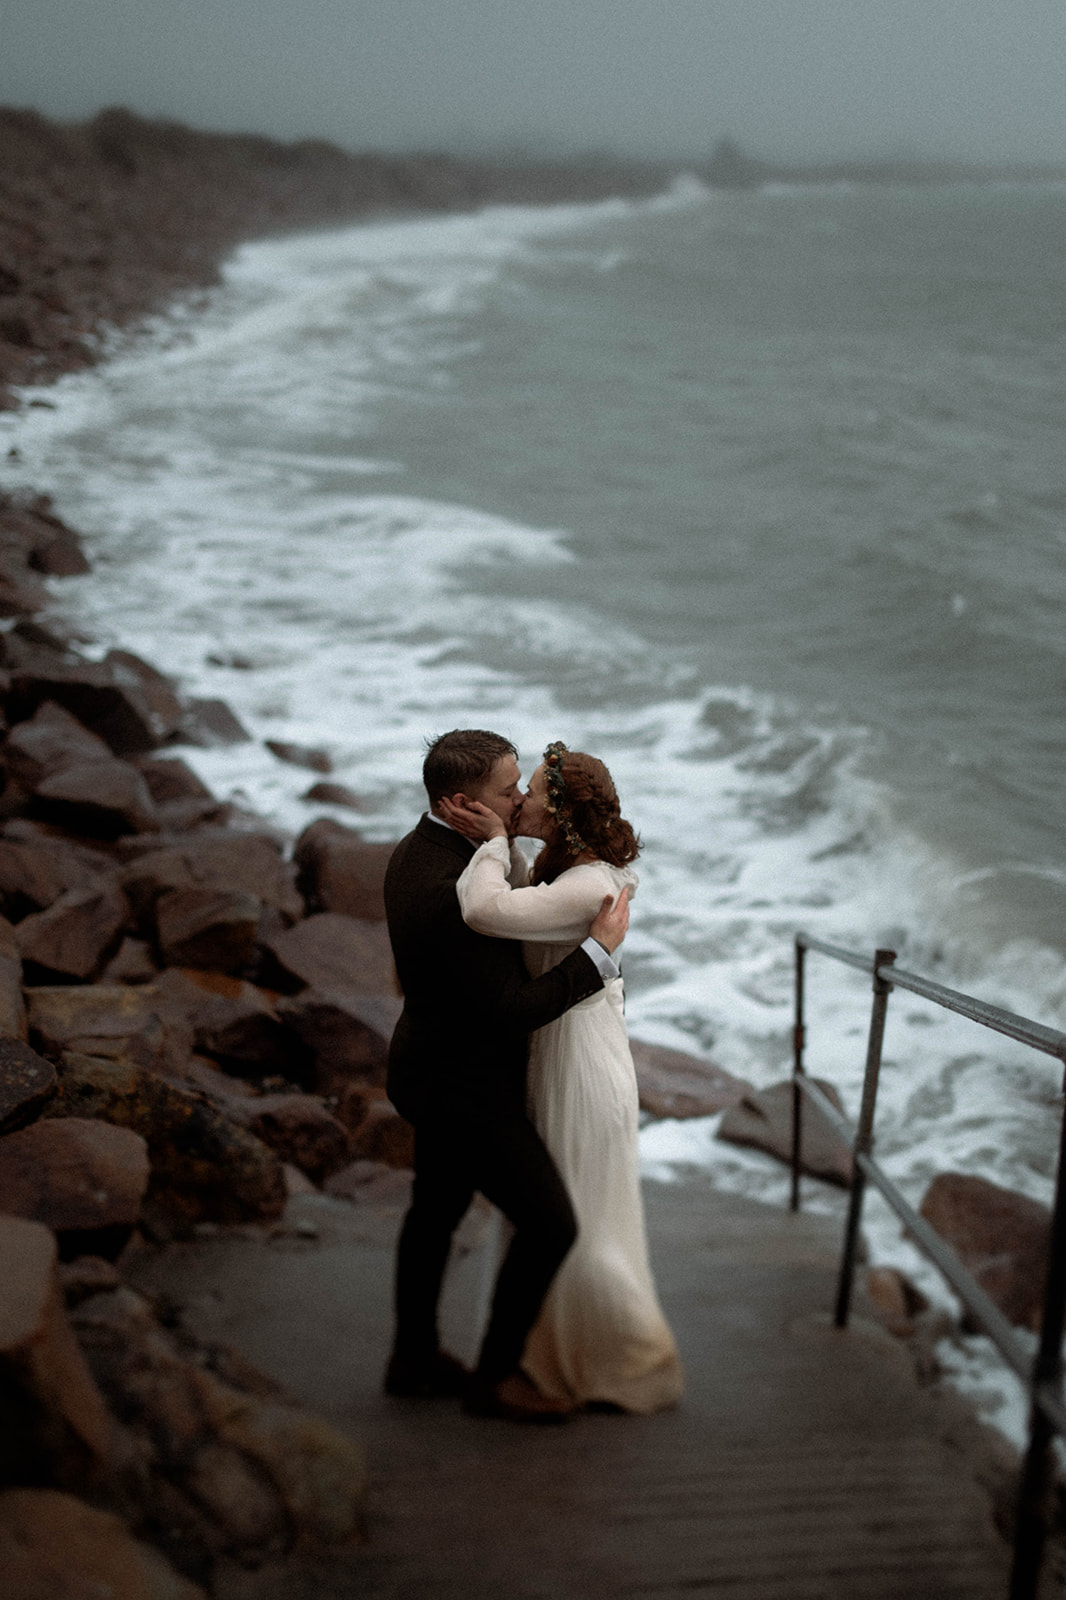 Wales Elopement Photography | Coastal Elopements in Wales